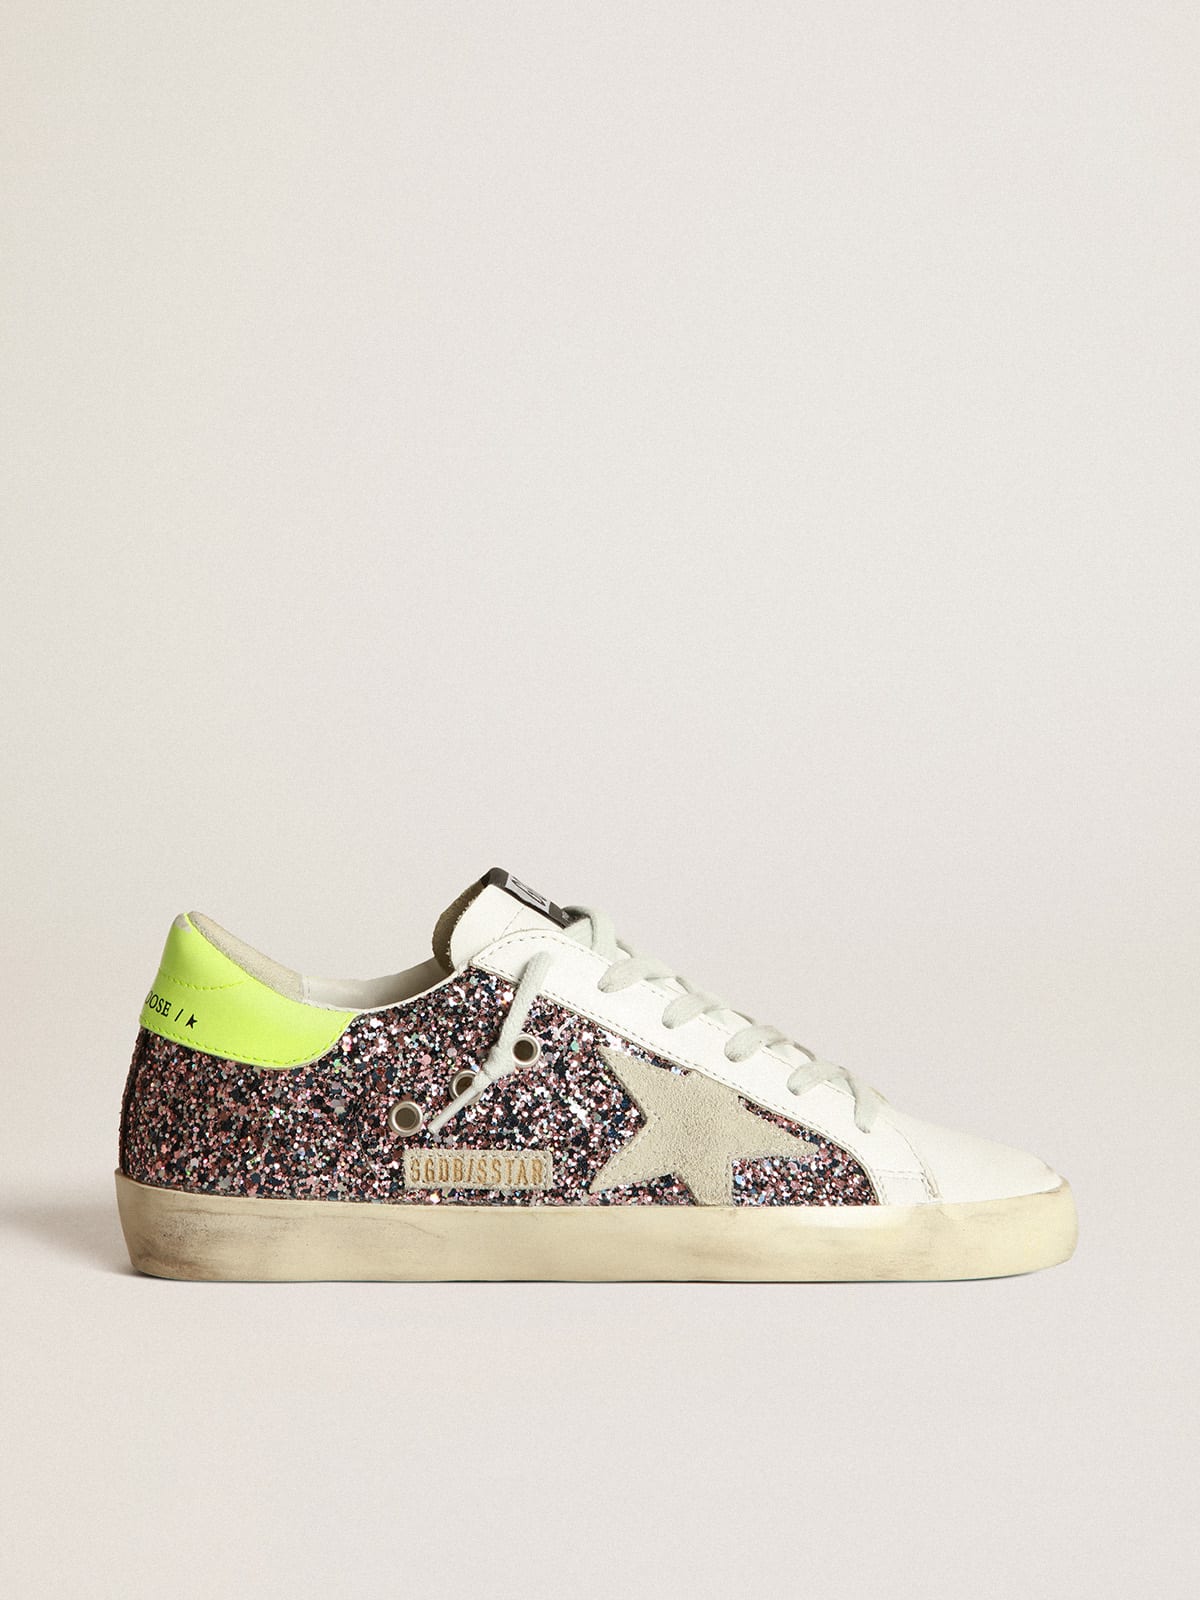 Golden Goose - Super-Star sneakers in gray and pink glitter with ice-gray suede star and fluorescent yellow leather heel tab in 